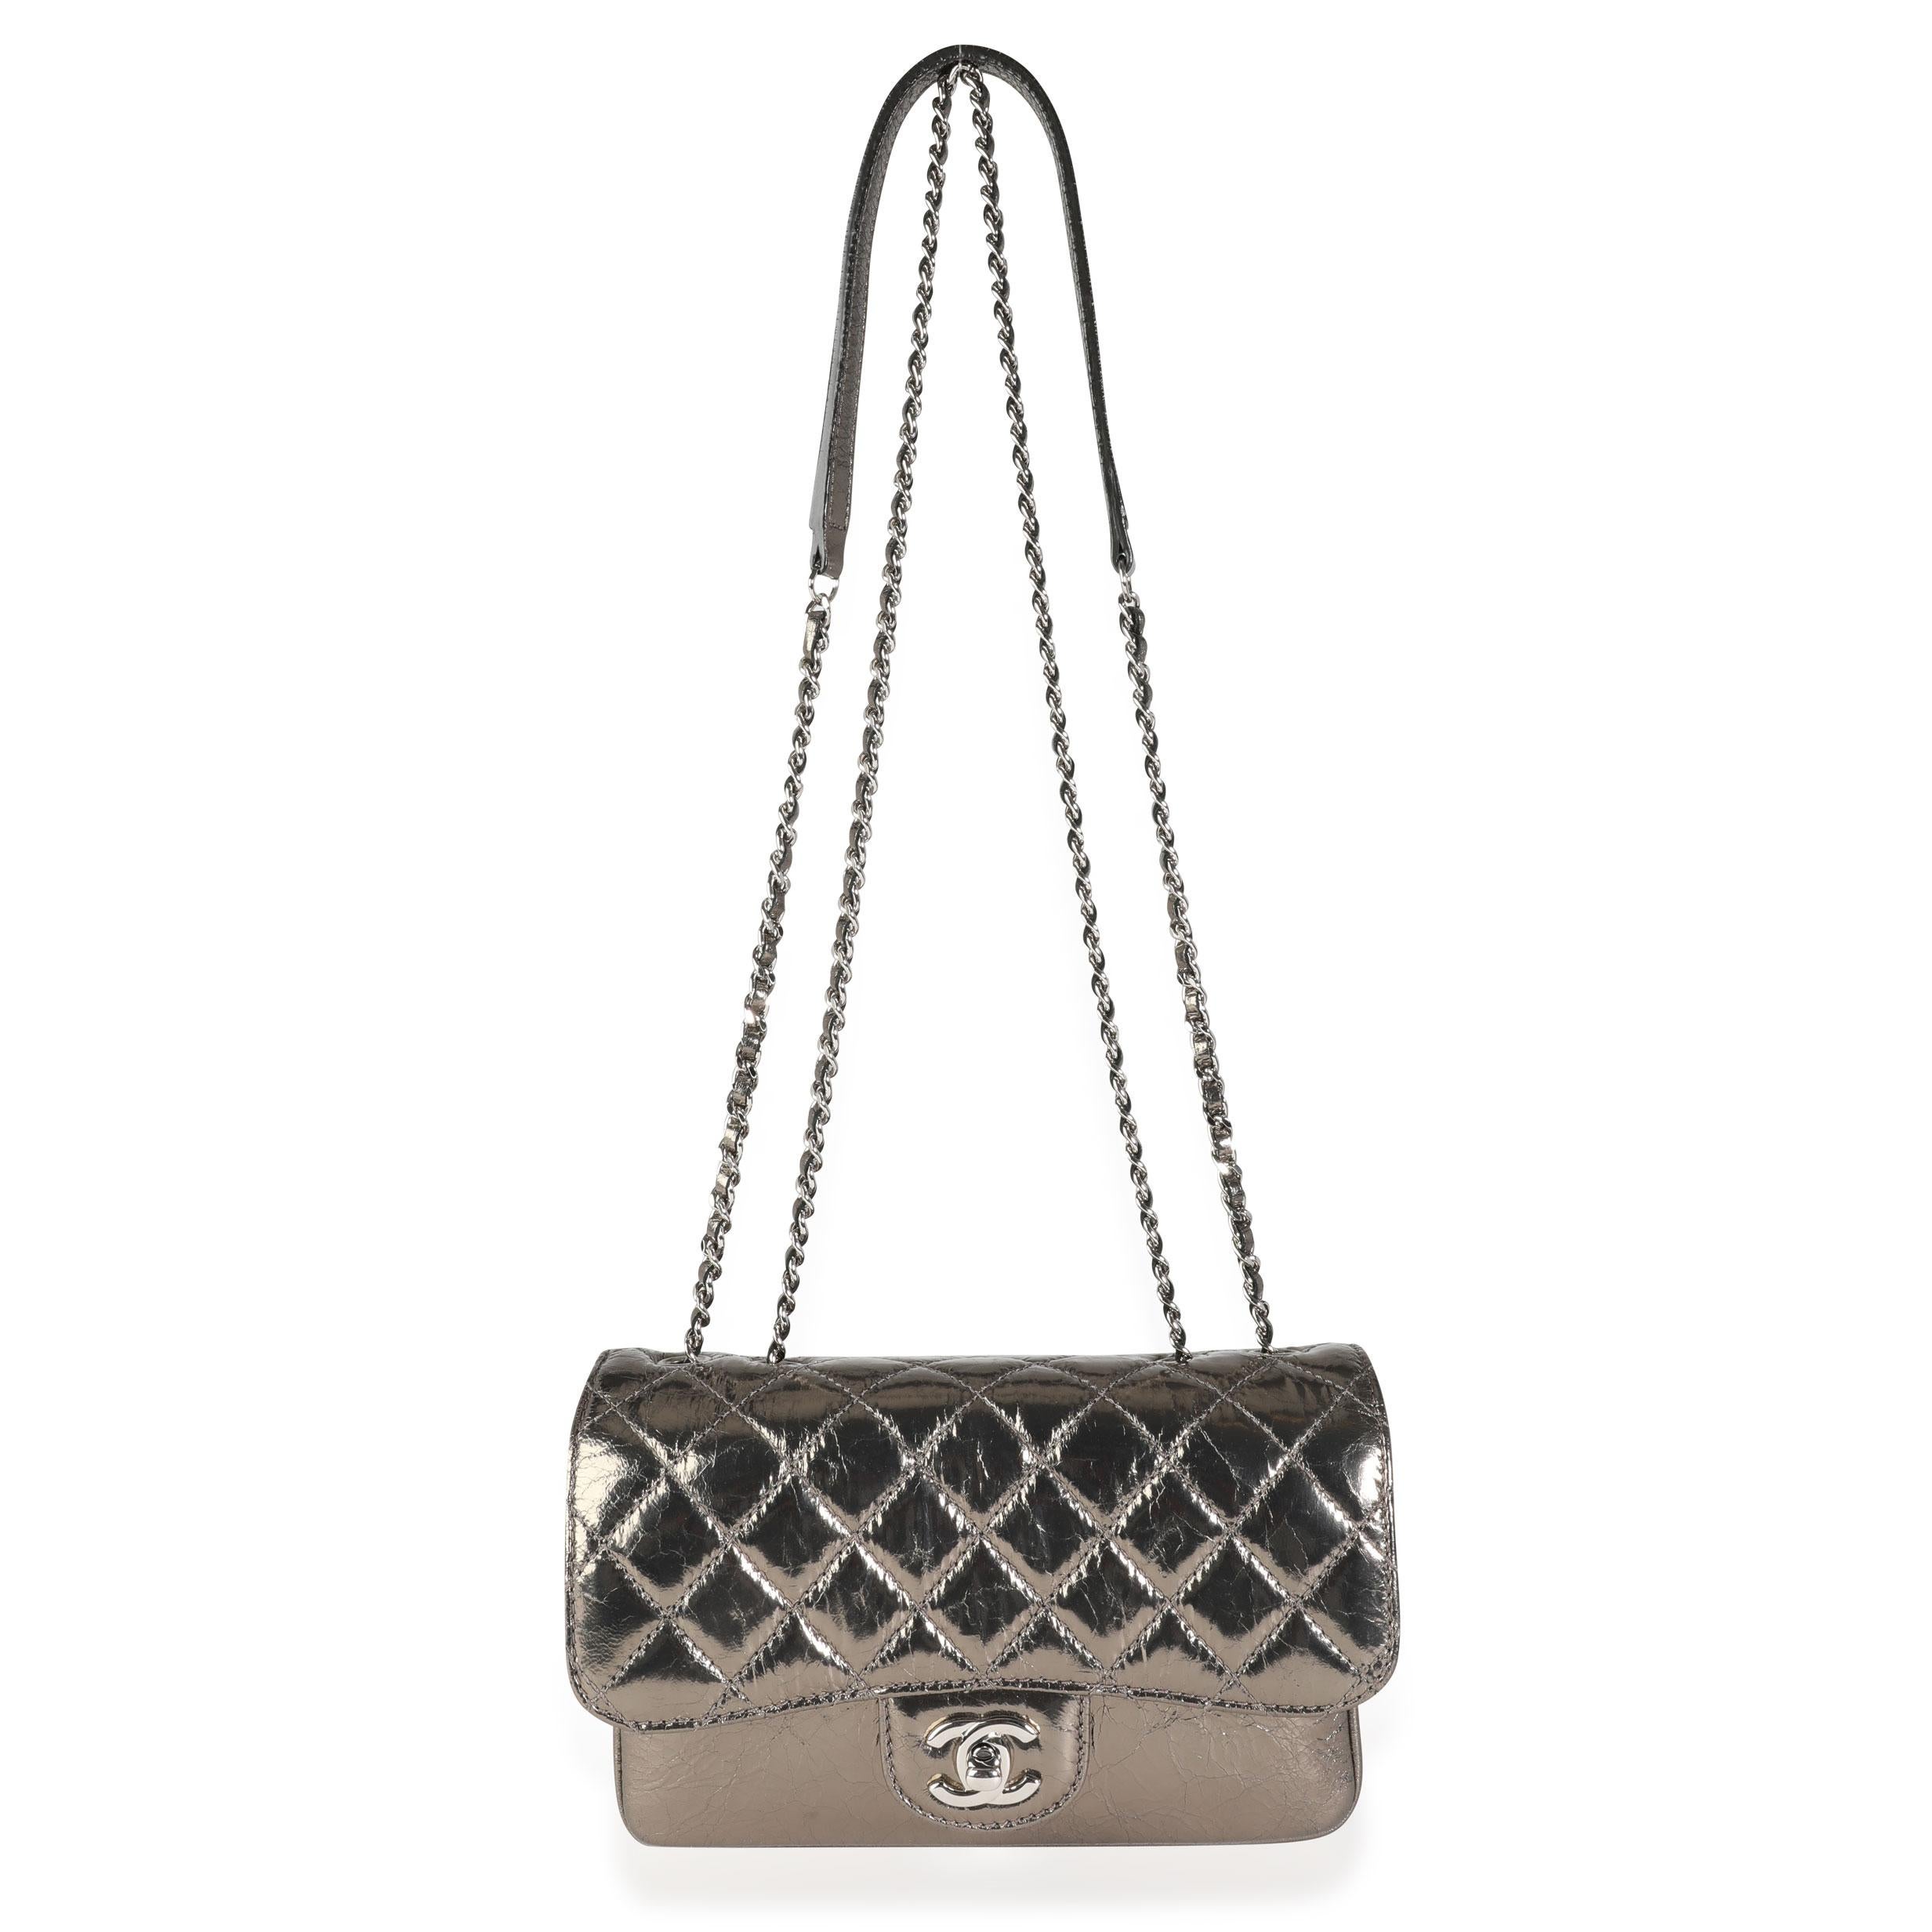 Listing Title: Chanel Metallic Cracked Leather Clams Pocket Accordion Flap Bag
SKU: 114421
Condition: Pre-owned (3000)
Handbag Condition: Excellent
Condition Comments: Excellent Condition. Faint discoloration to interior. No other visible signs of